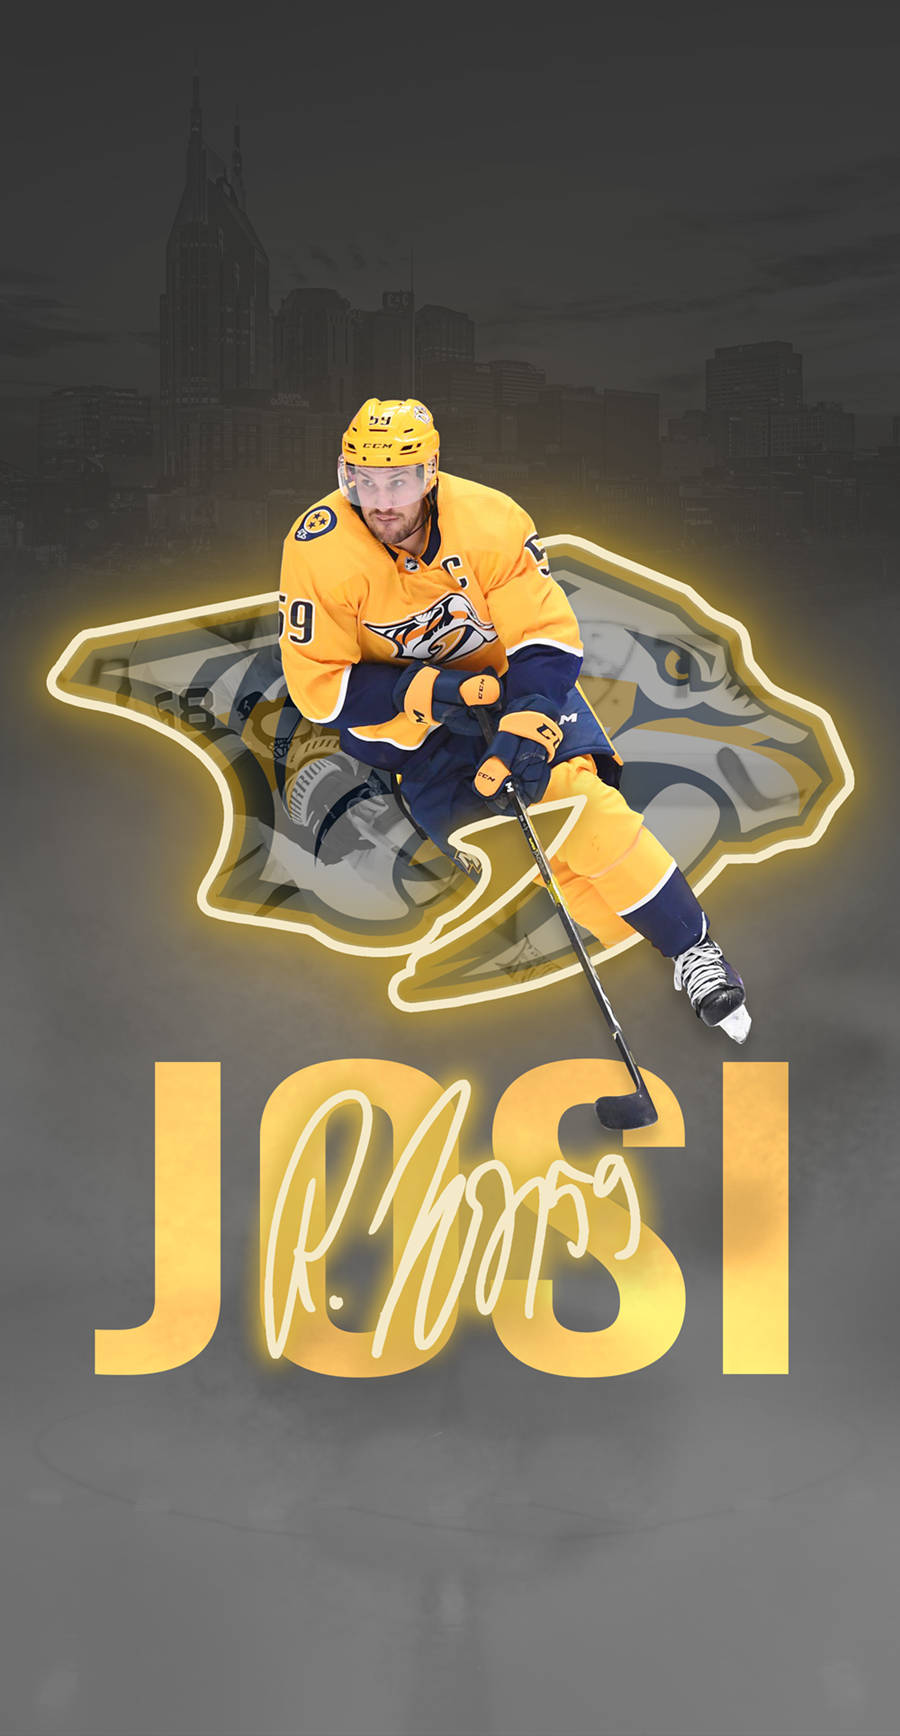 Roman Josi, the top ice hockey player in action Wallpaper